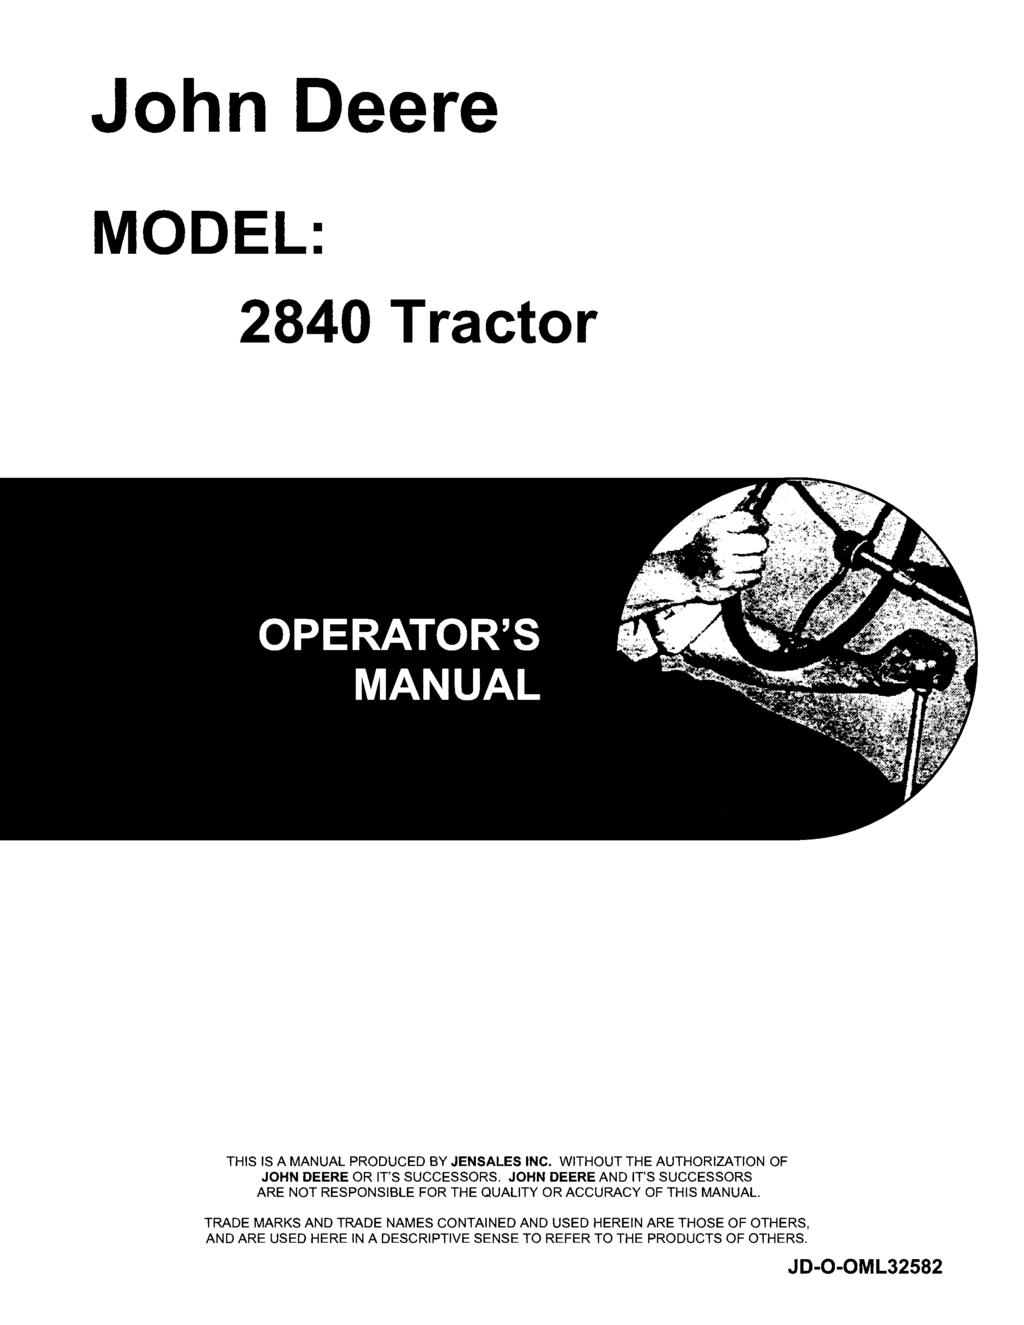 John Deere MODEL: 2840 Tractor THIS IS A MANUAL PRODUCED BY JENSALES INC. WITHOUT THE AUTHORIZATION OF JOHN DEERE OR IT'S SUCCESSORS.